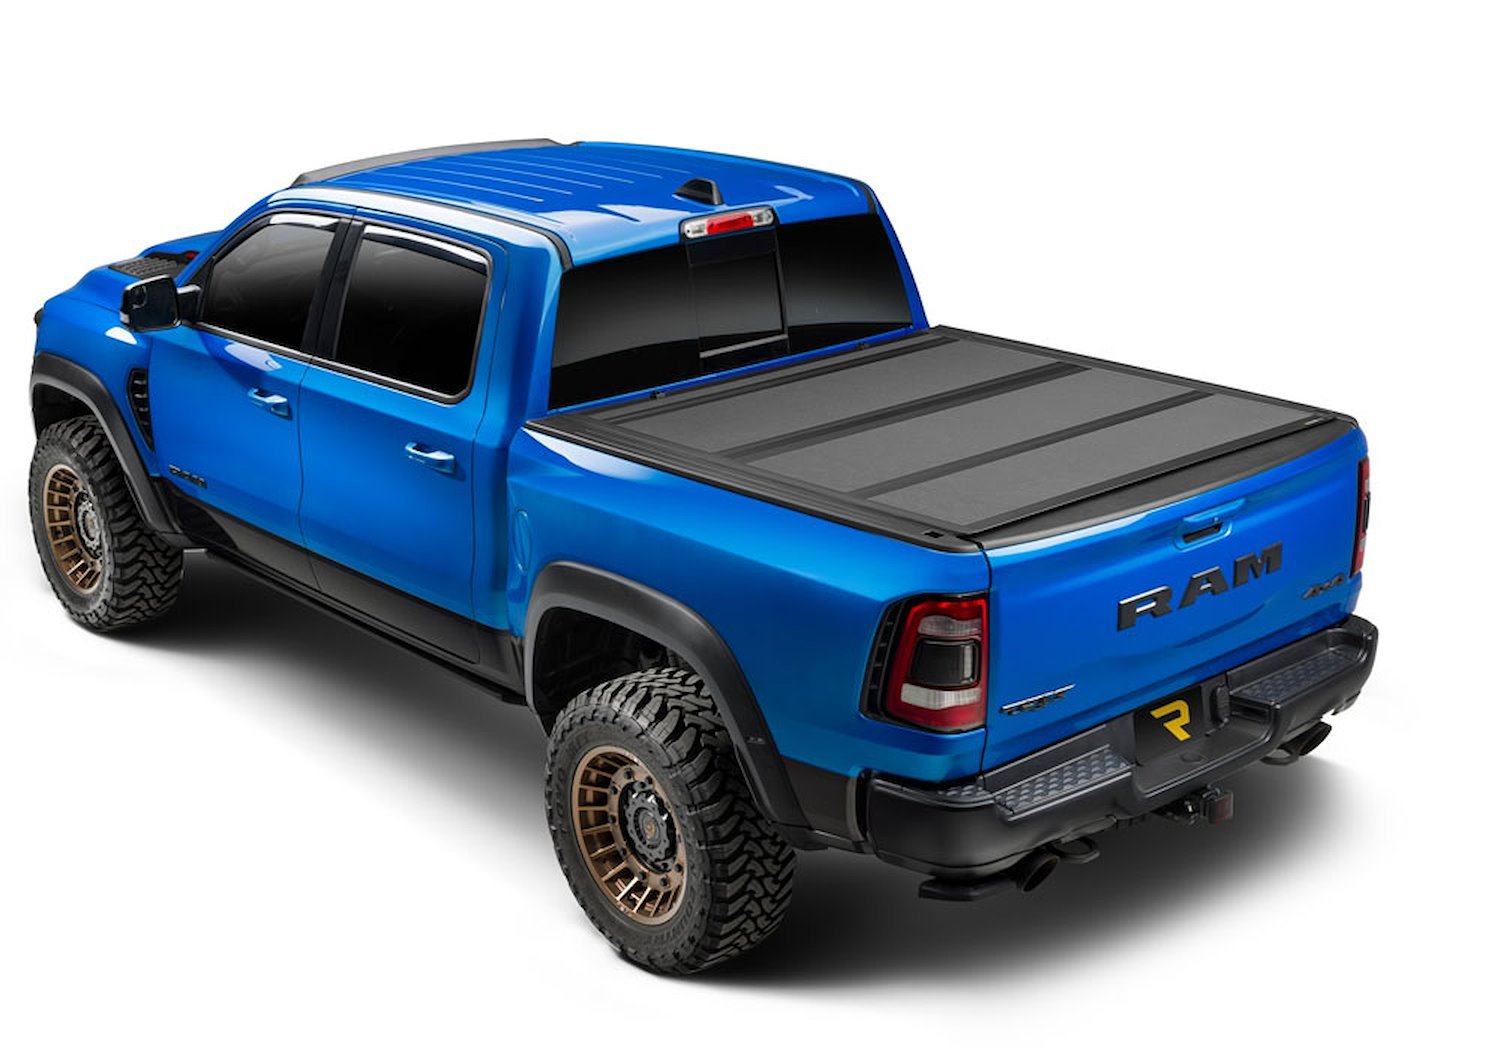 80460 Endure ALX Tonneau Cover for 14-21 Tundra 5 ft.7 in. w/o Deck Rail Sys w/o Trl Spcl Edtn Strg Bxs